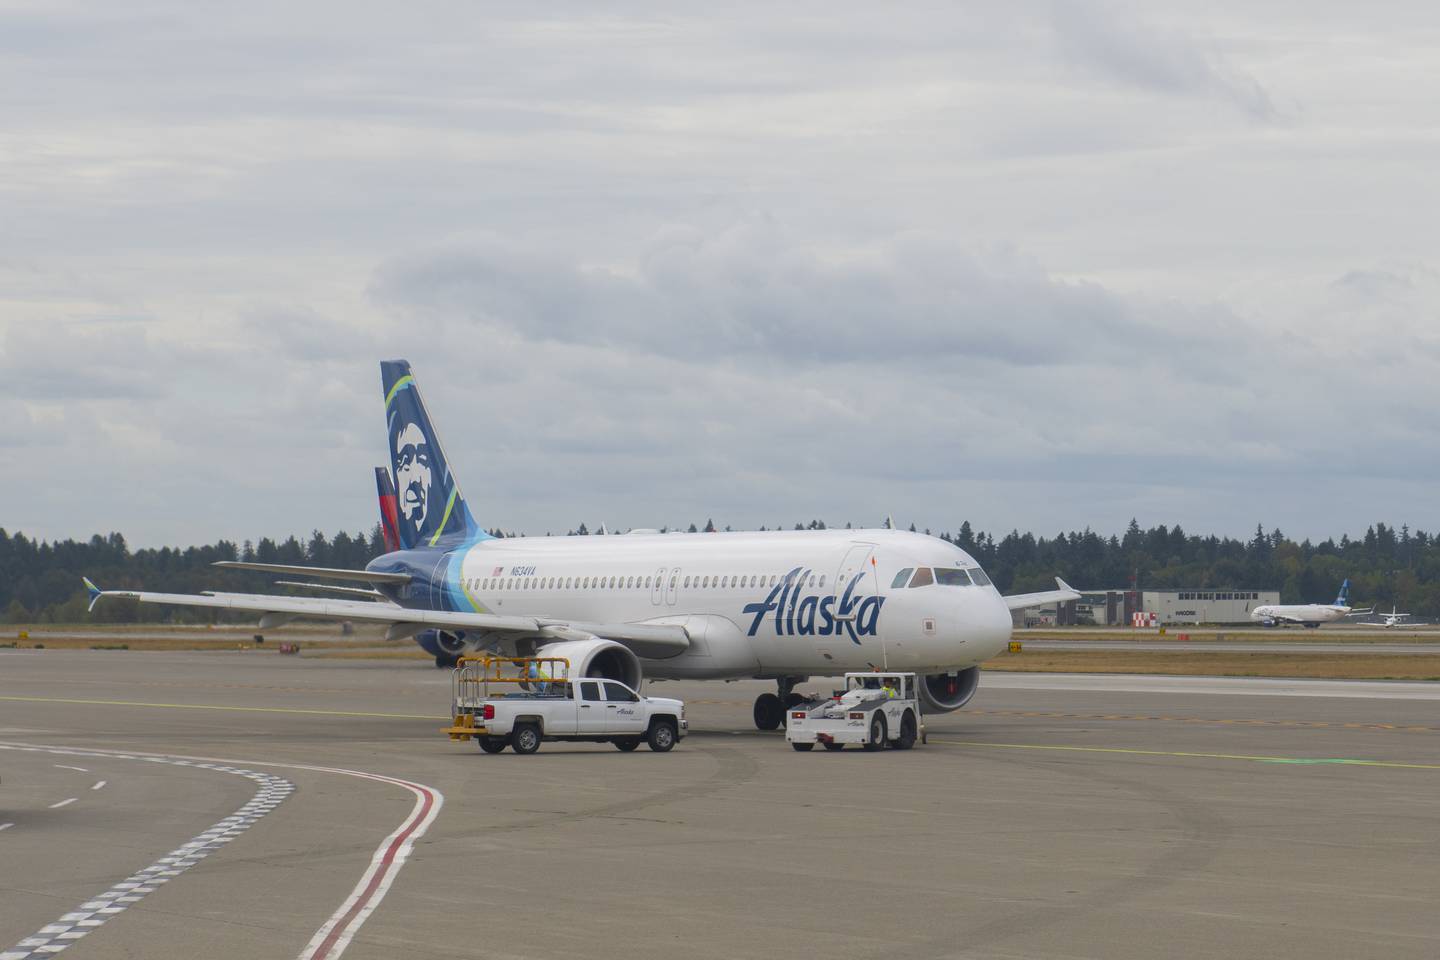 Passengers can expect Alaska Airlines to continue canceling flights at a high level for weeks